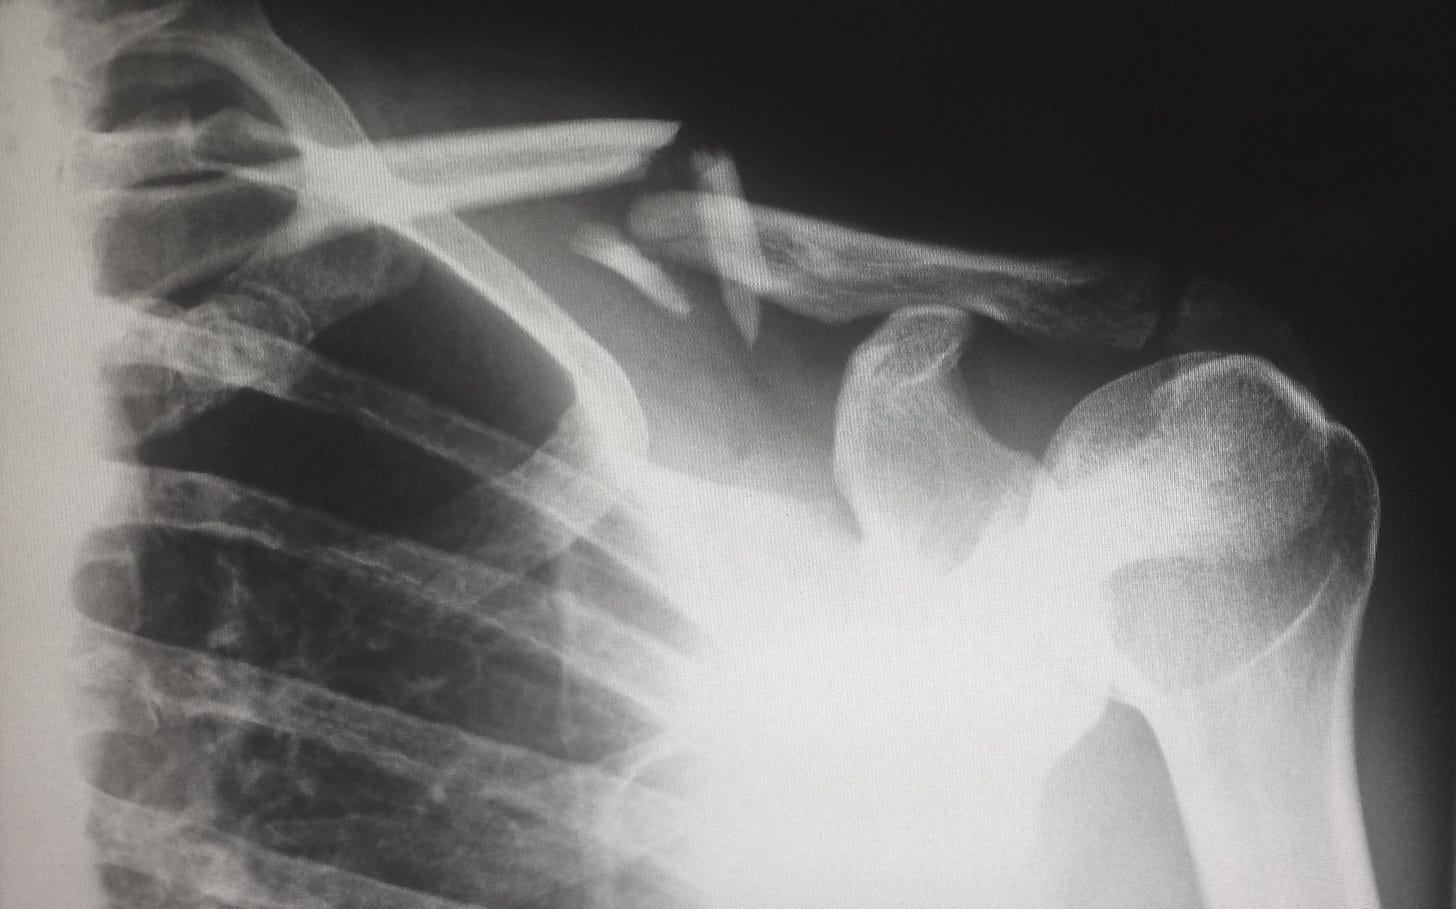 An x-ray showing ribs and a shoulder socket